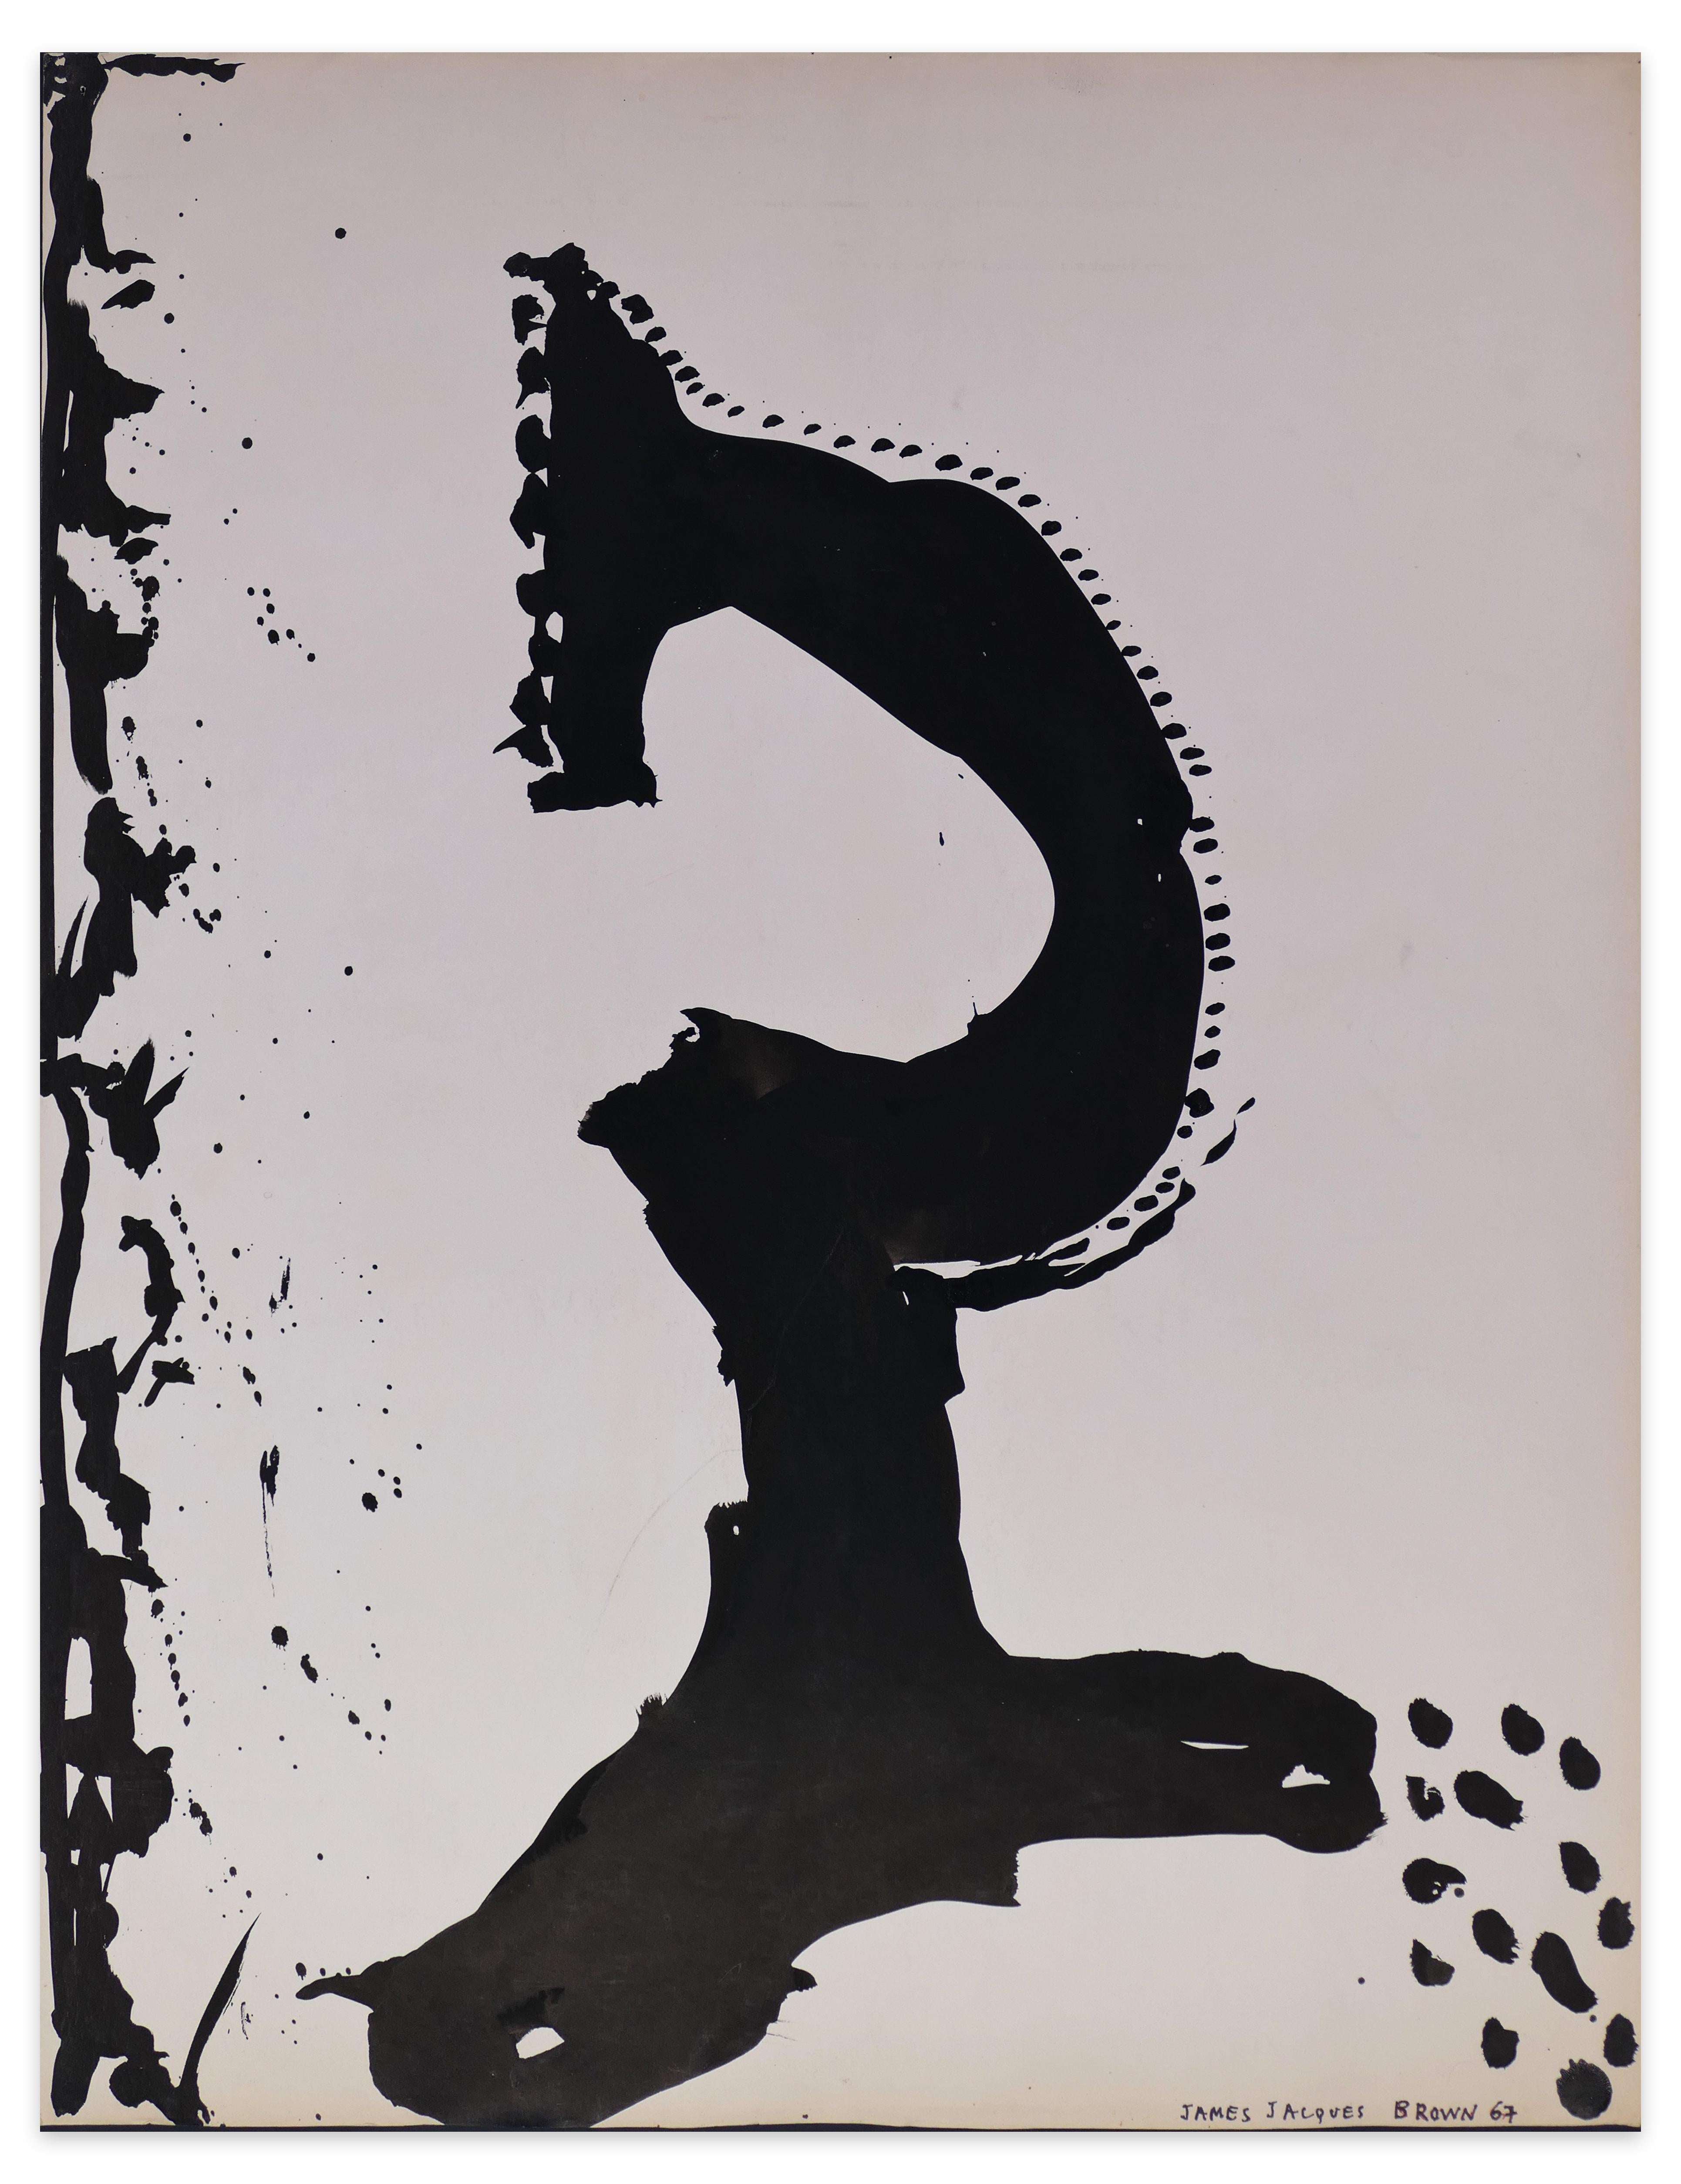 James-Jacques Brown Abstract Painting - Abstract Noir - Original Tempera on Paper by J.-J. town - 1967